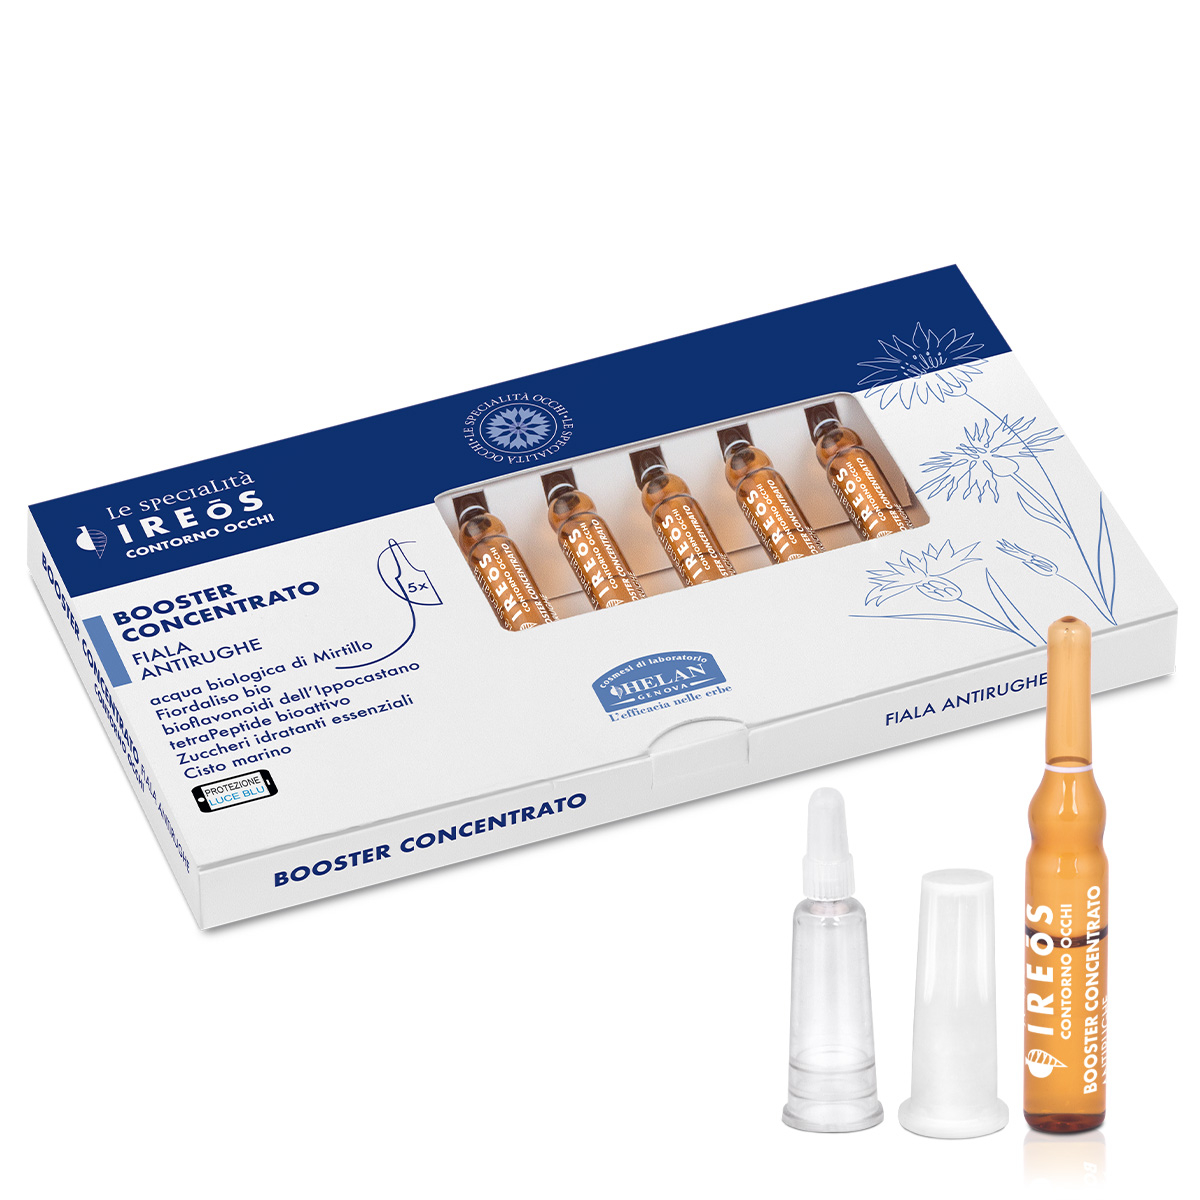 Concentrated Booster Anti-Wrinkle Vial